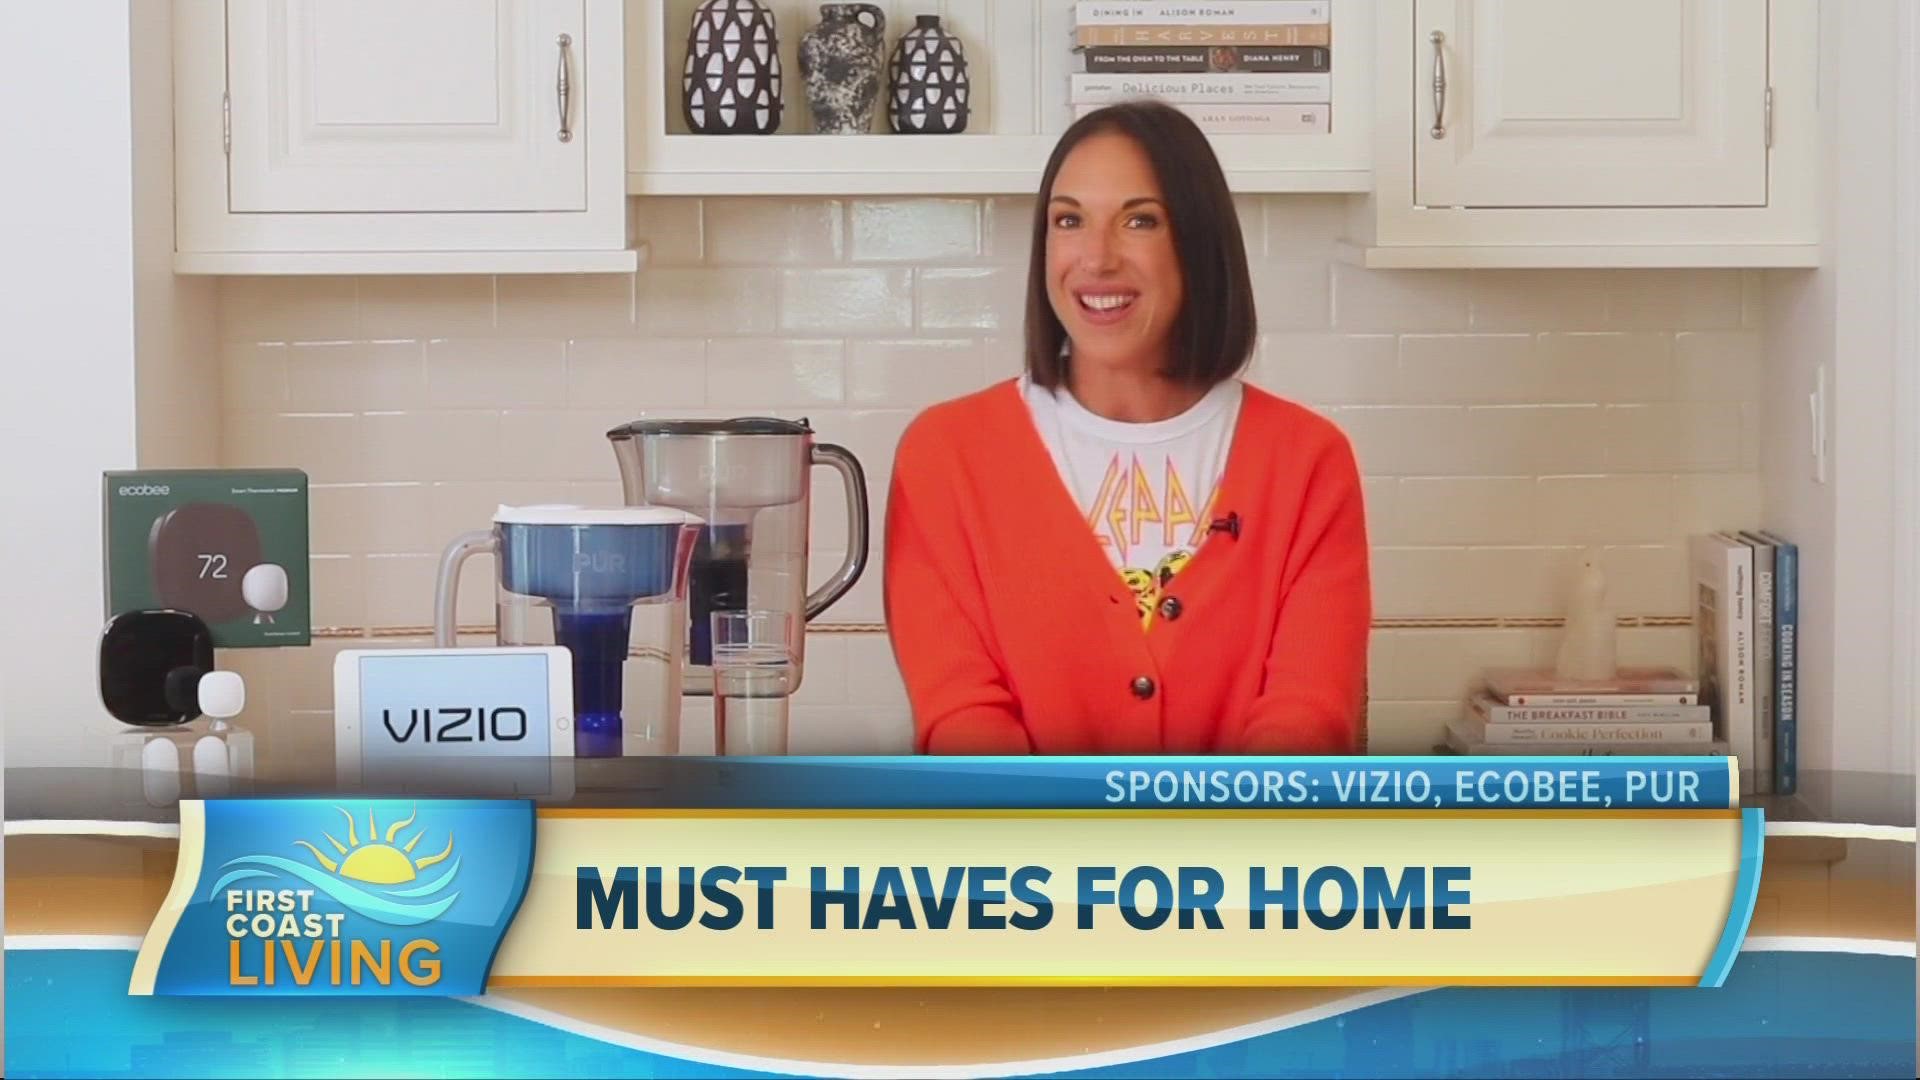 Trend Expert, Justine Santaniello has some cool fall ideas for updating your home and dorm.